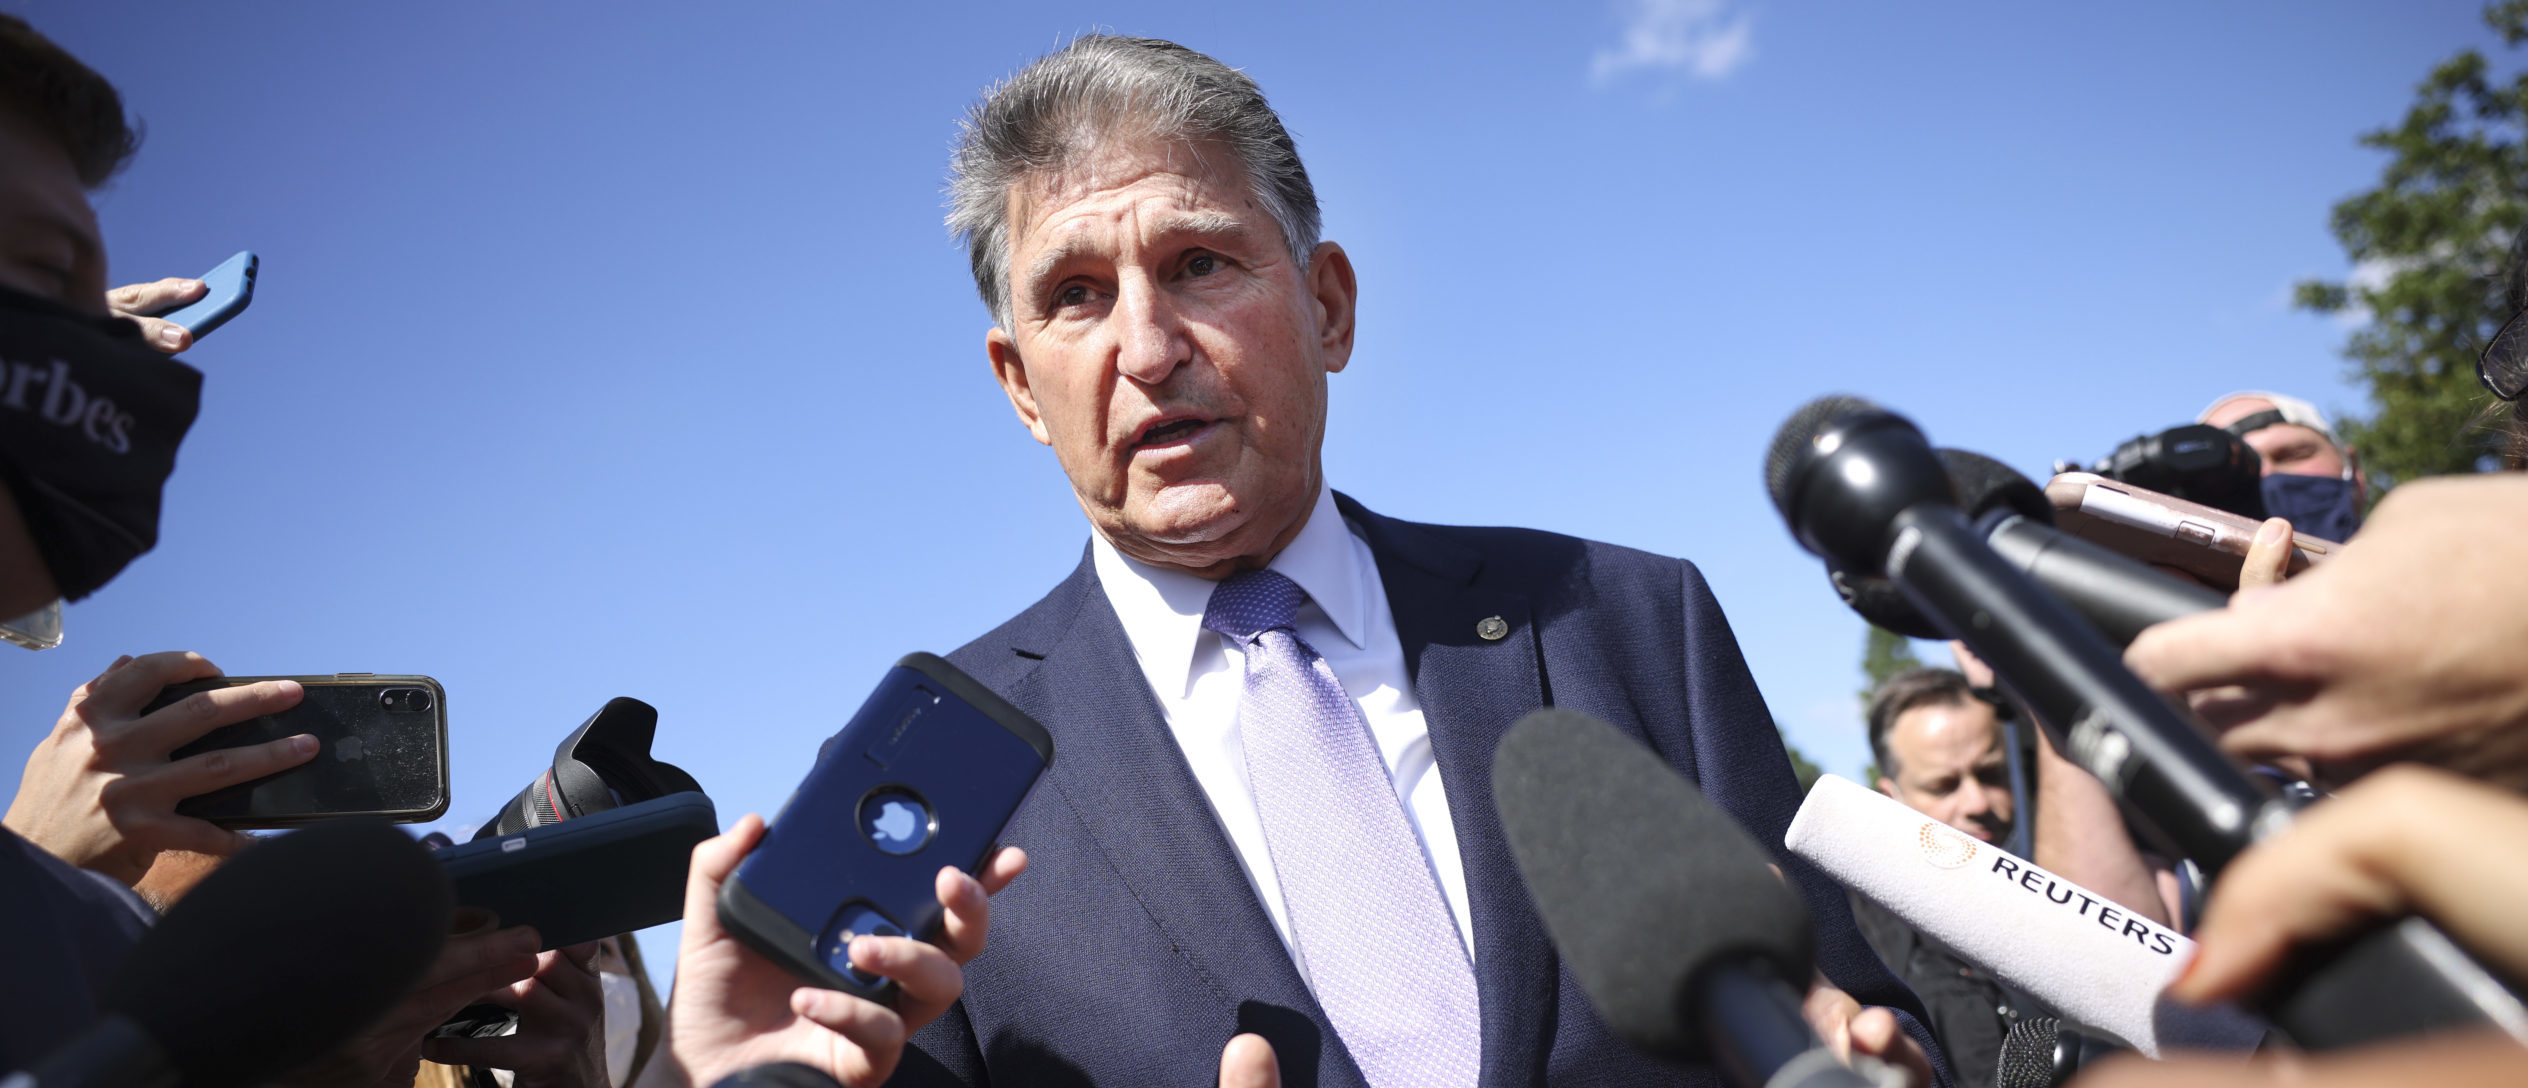 WASHINGTON, DC - SEPTEMBER 30: Sen. Joe Manchin (D-WV) speaks to reporters outside of the U.S. Capitol on September 30, 2021 in Washington, DC. The Senate is expected to pass a short term spending bill to avoid a government shutdown. (Photo by Kevin Dietsch/Getty Images)